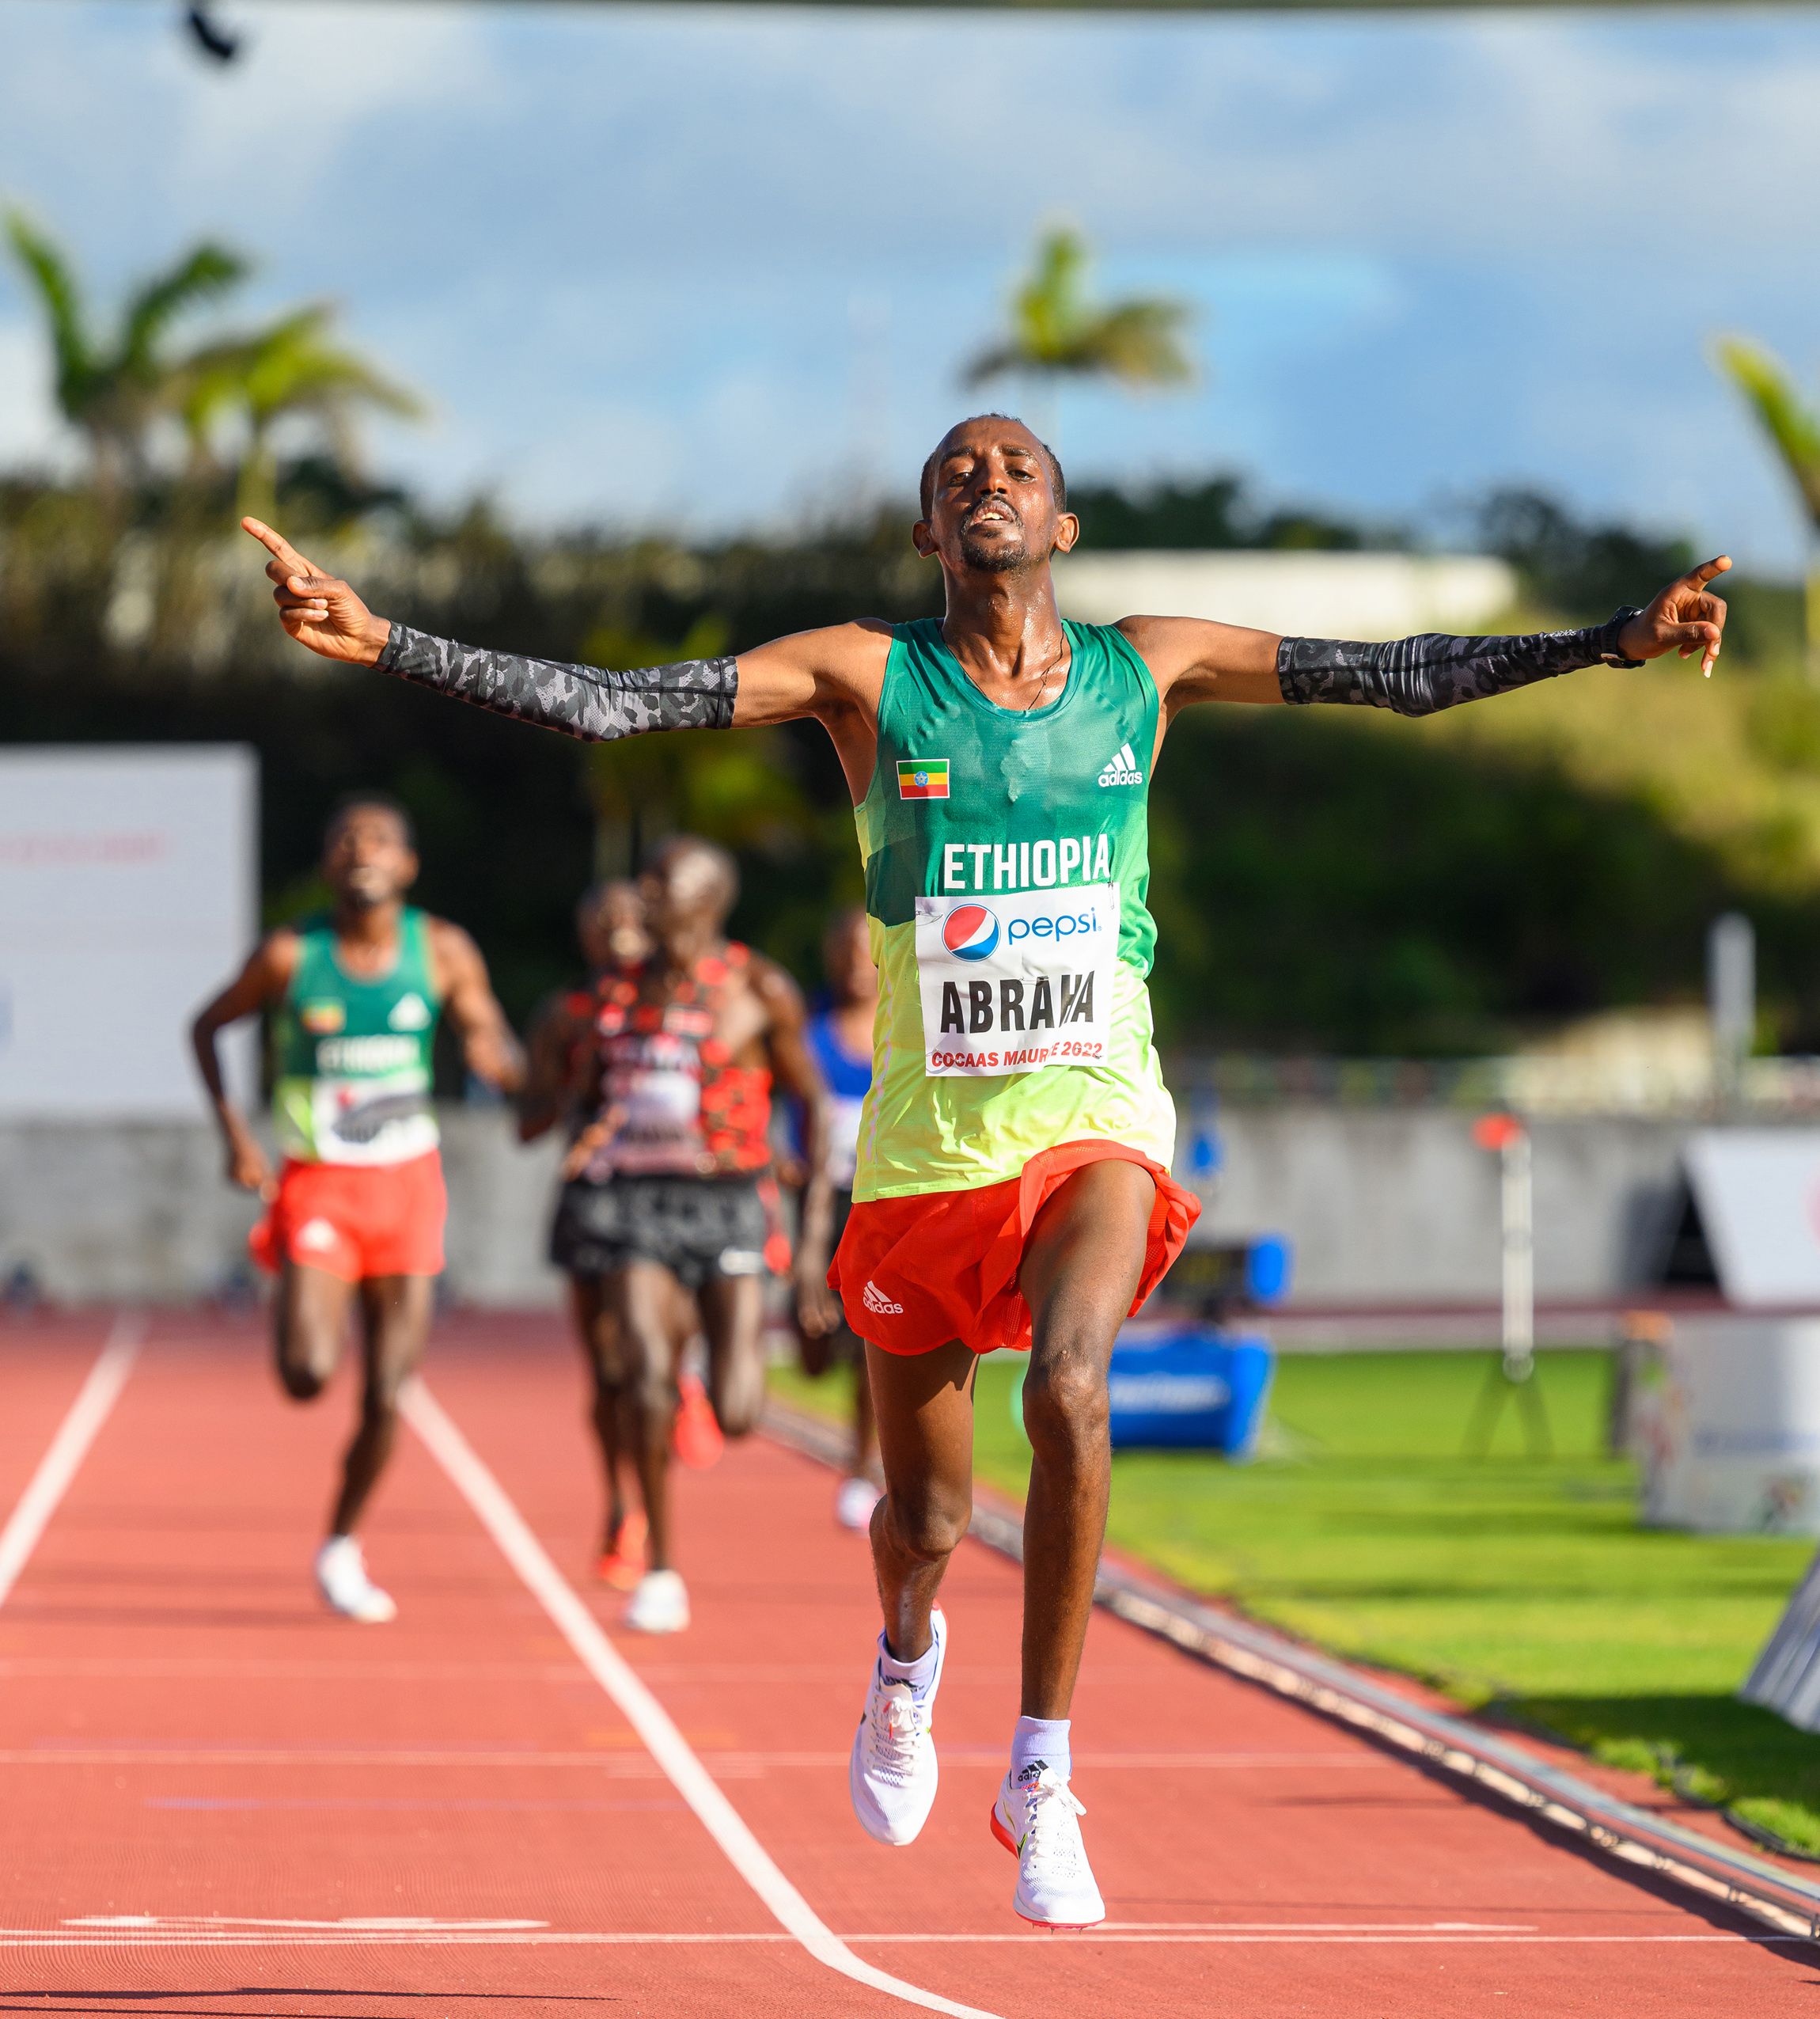 Mogos Tuemay Abraha wins the 10,000m at the African Championships